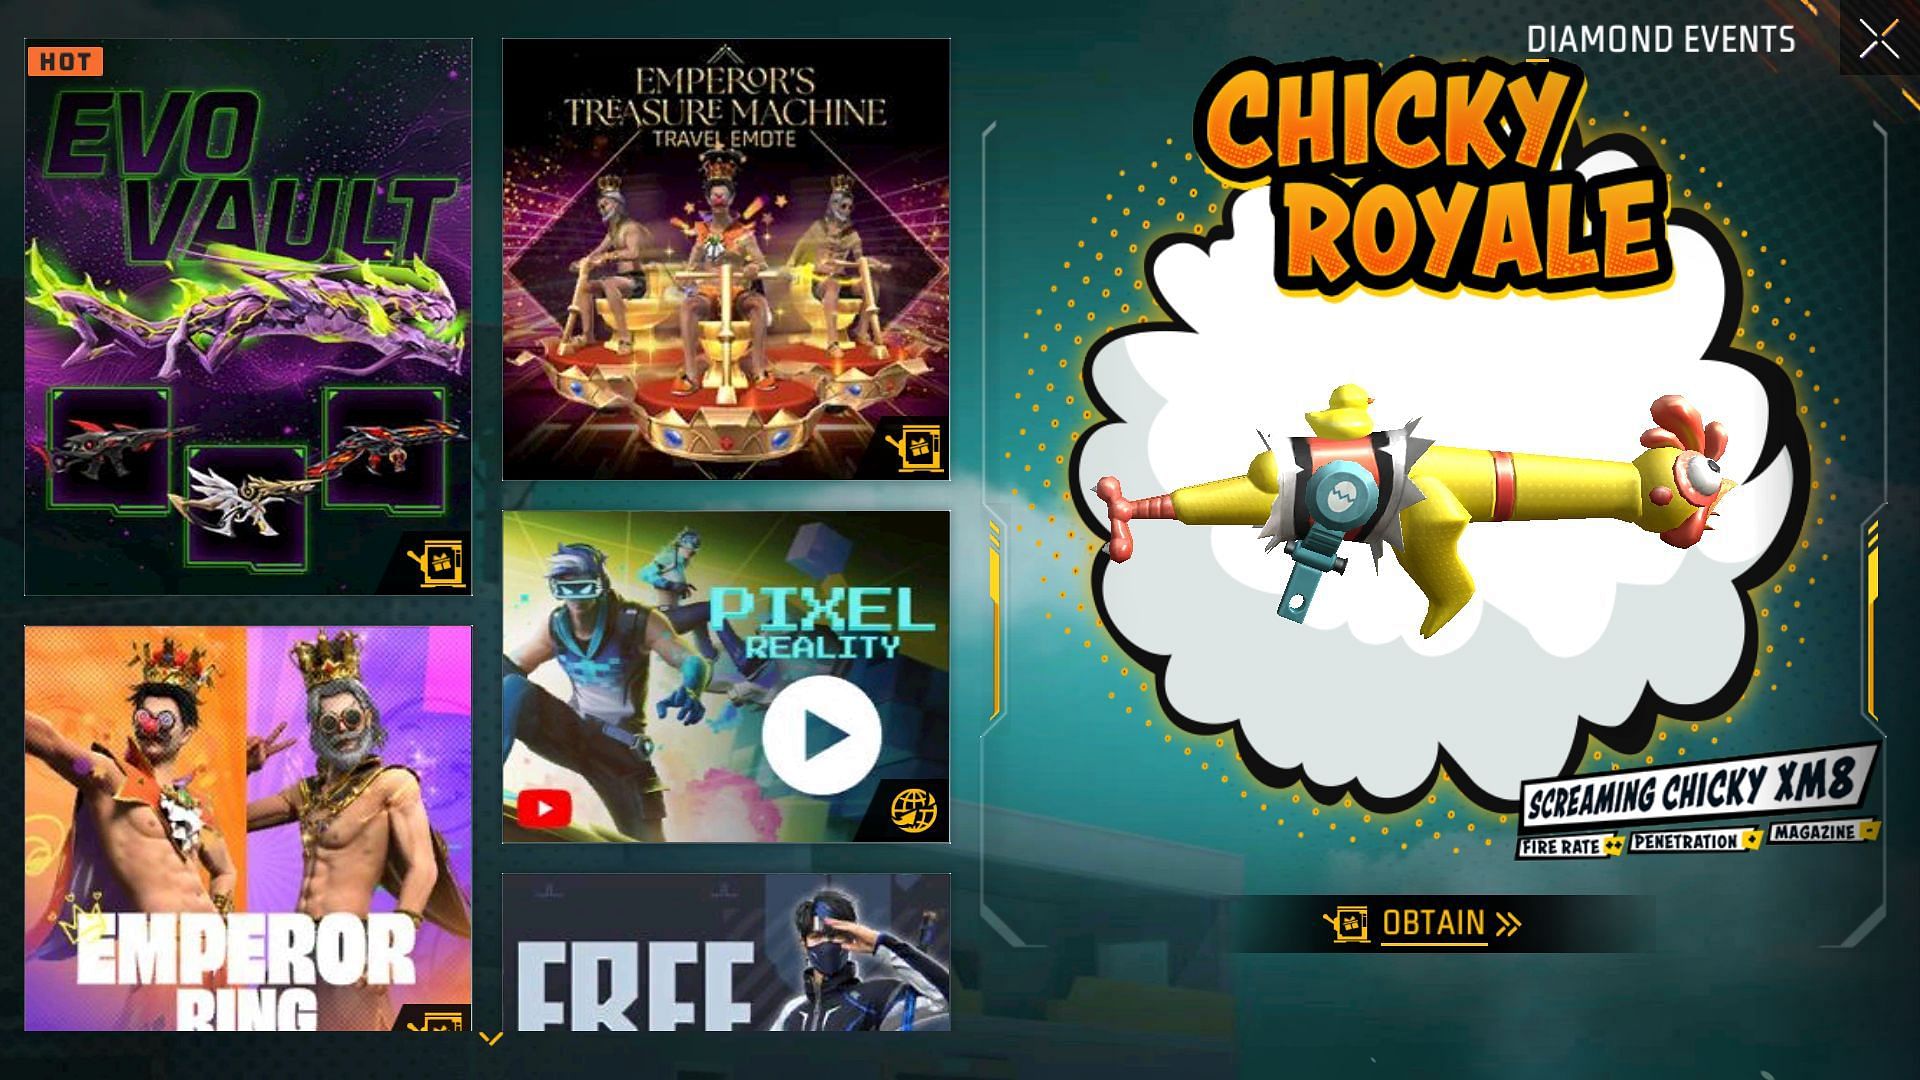 Follow these steps to access the Chicky Royale event (Image via Garena)